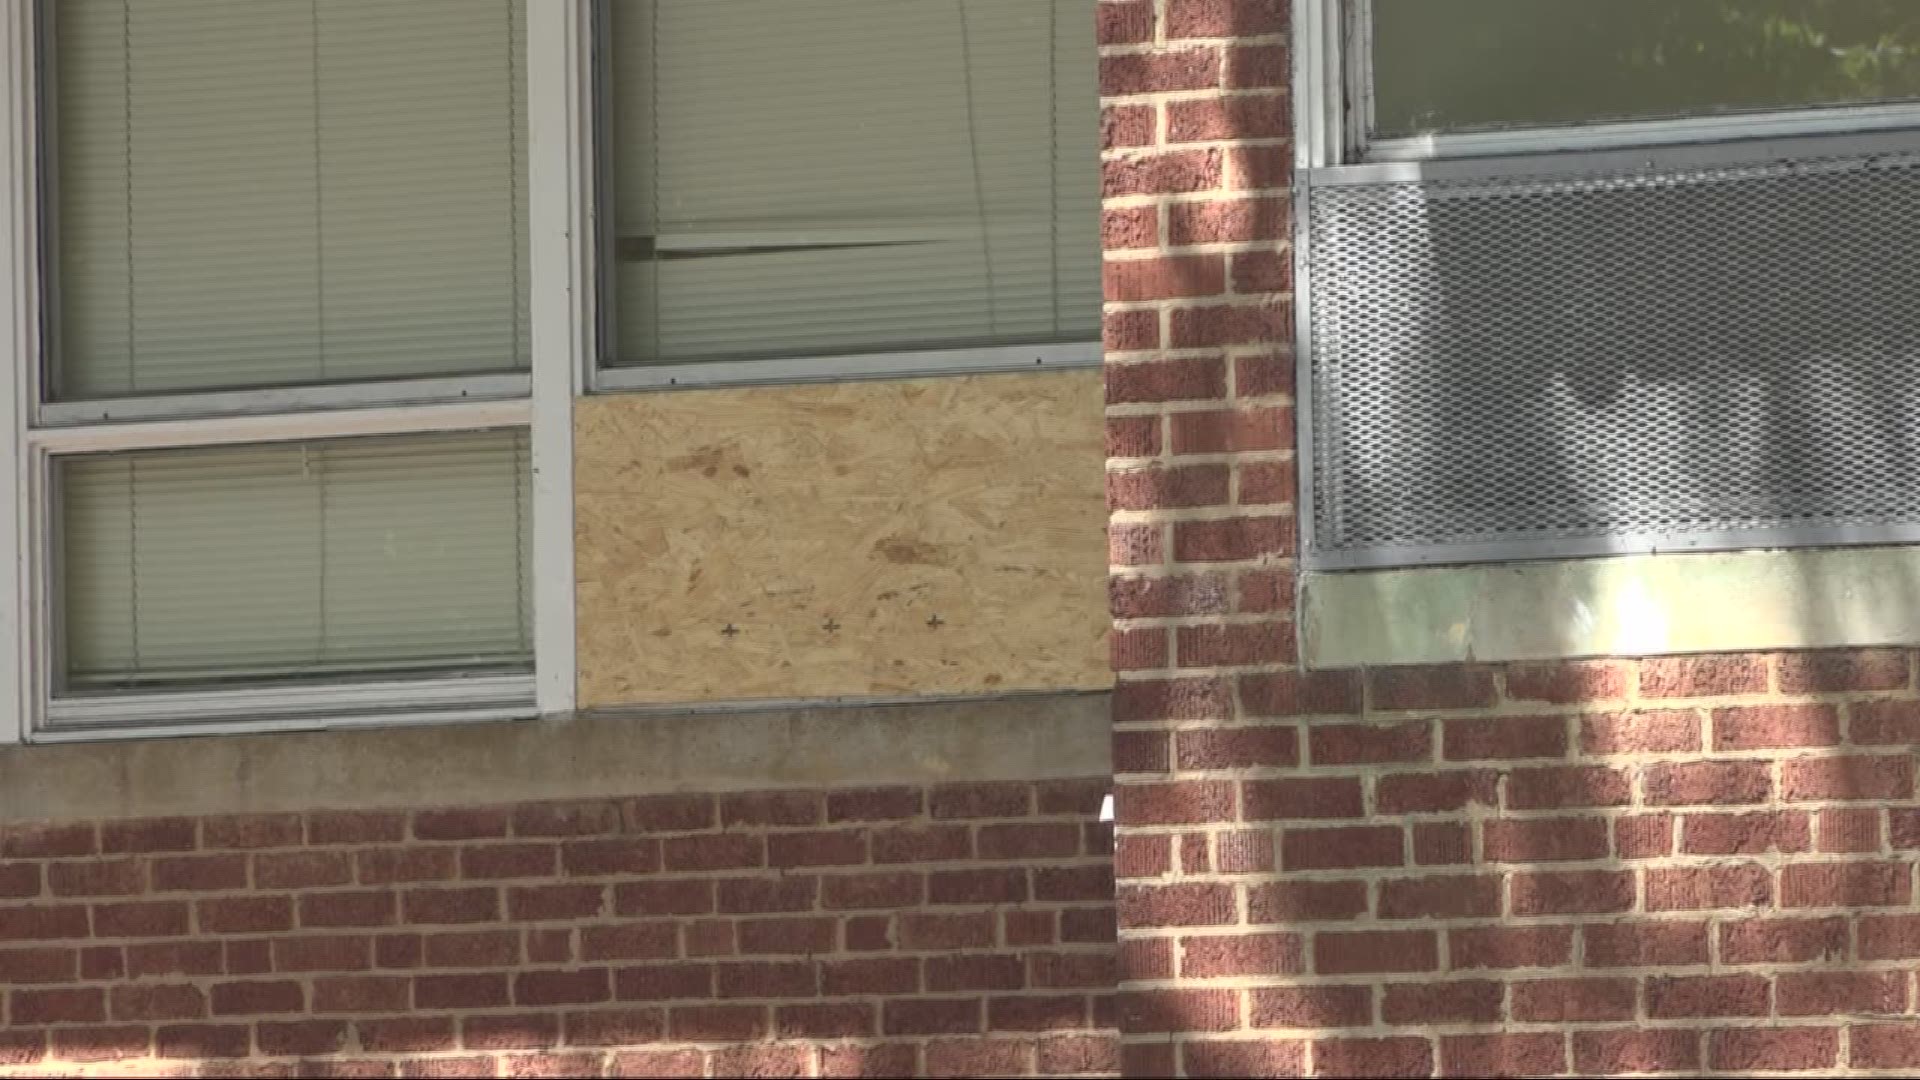 Police say a deer crashed through the window of a classroom while children were inside learning.